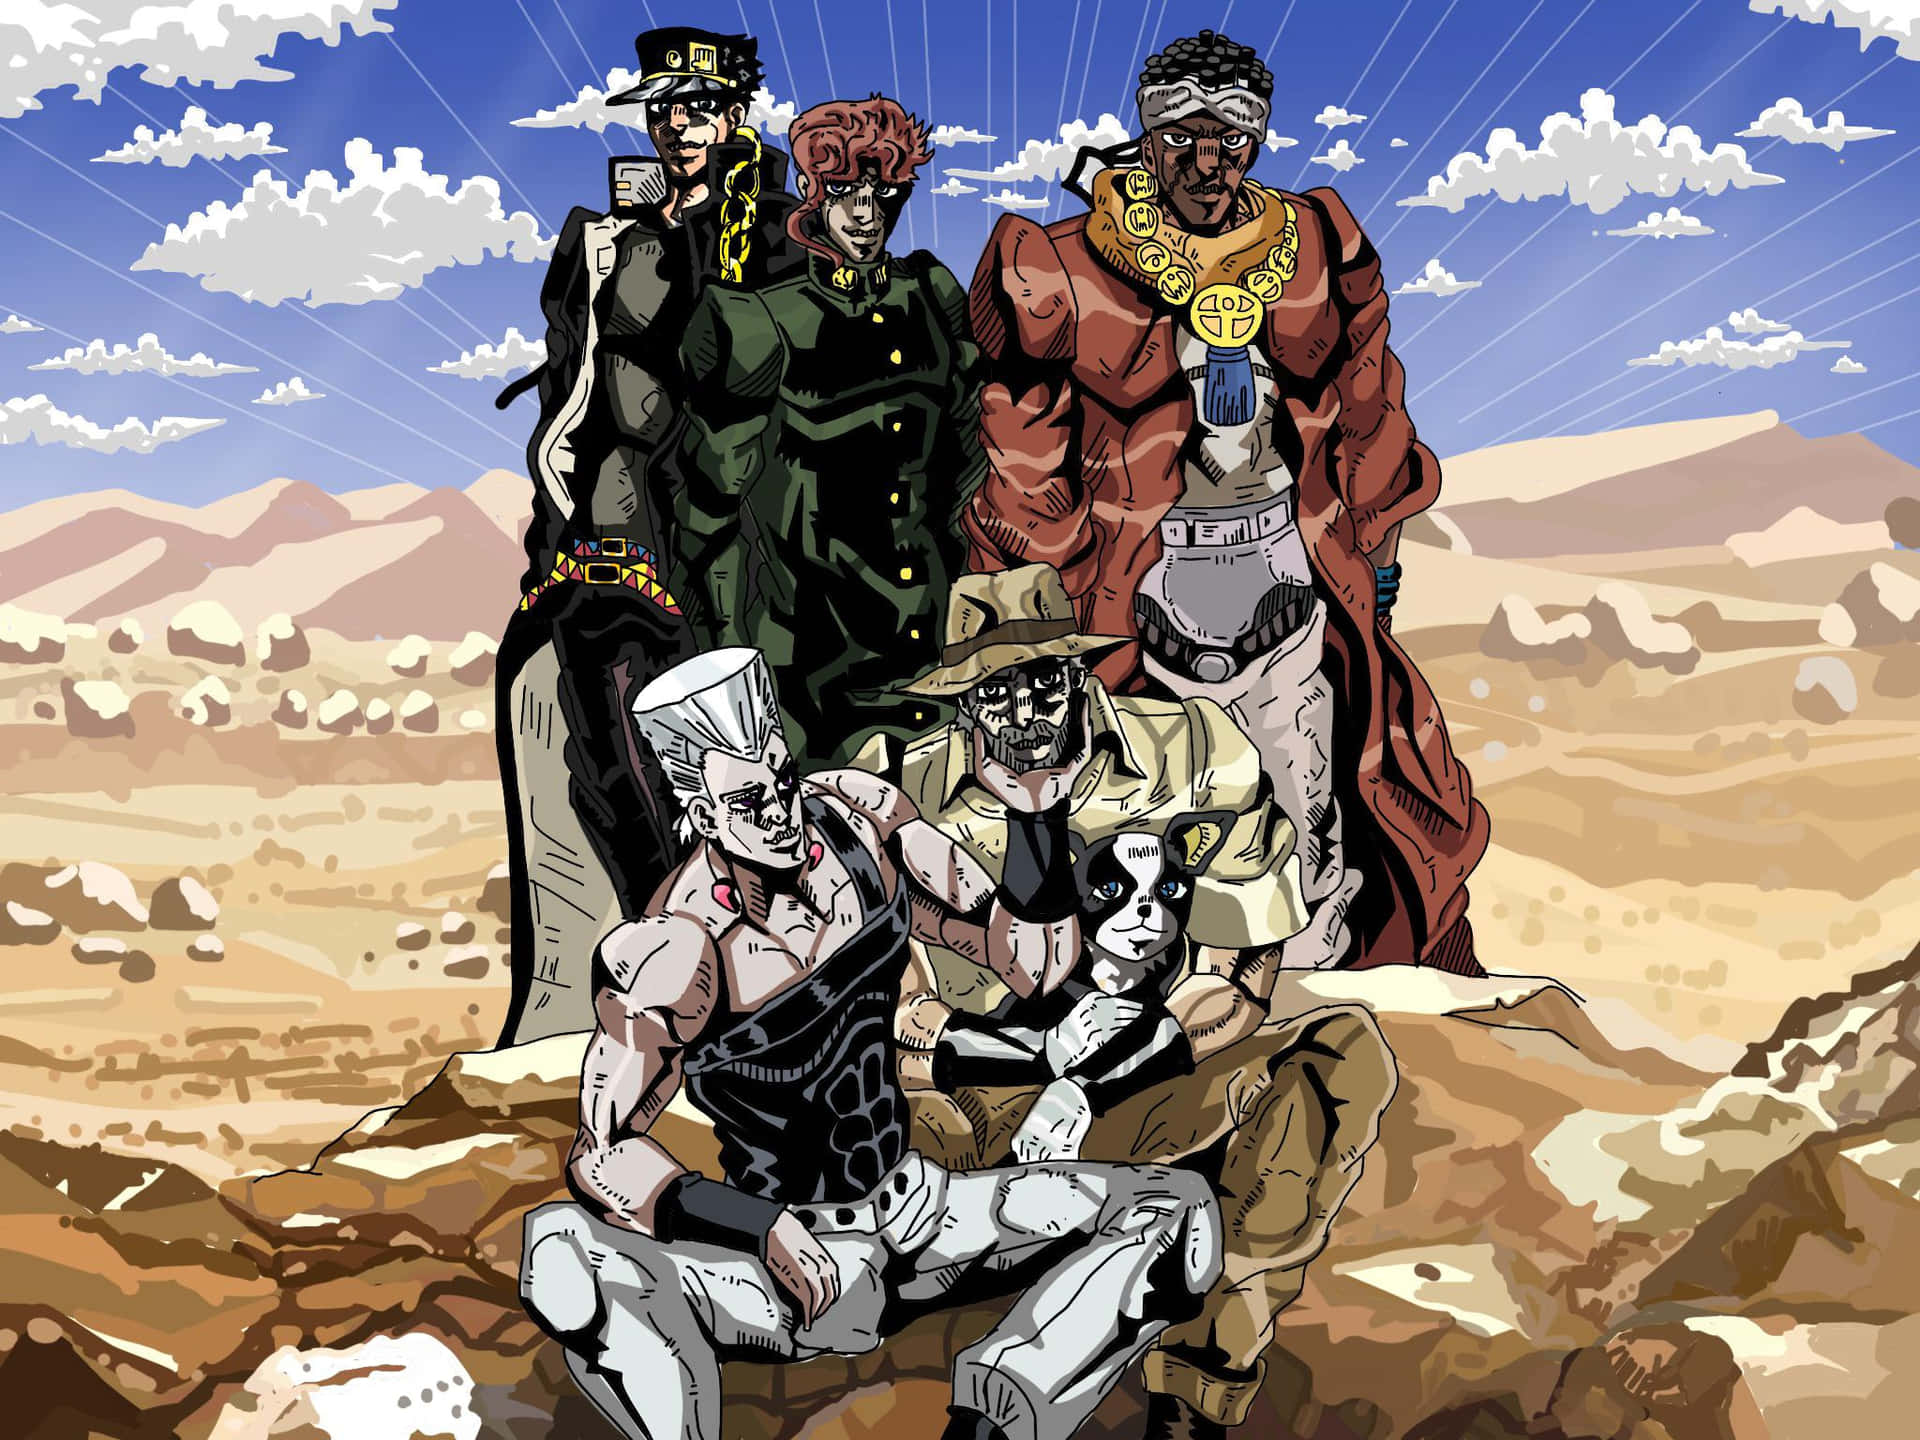 Jotaro Kujo and the Stardust Crusaders ready for an unforgettable adventure Wallpaper